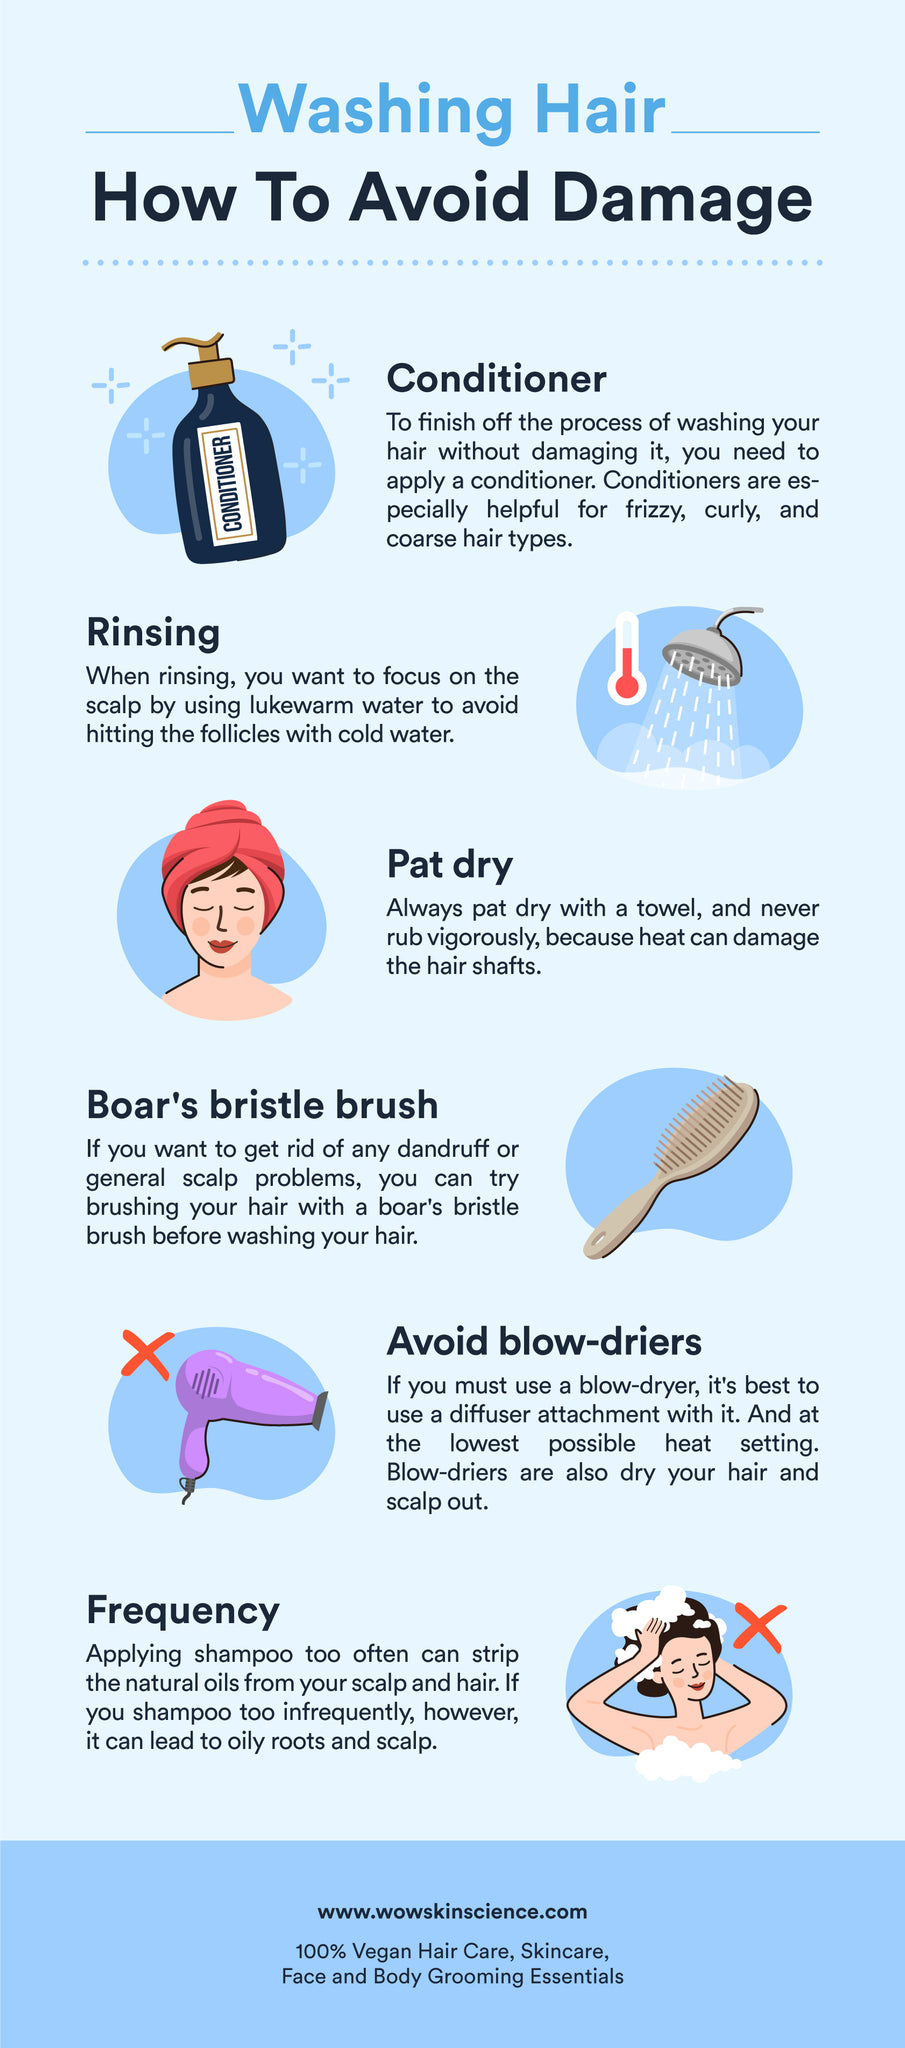 How to Wash Your Hair Without Damaging It: Tips and Tricks